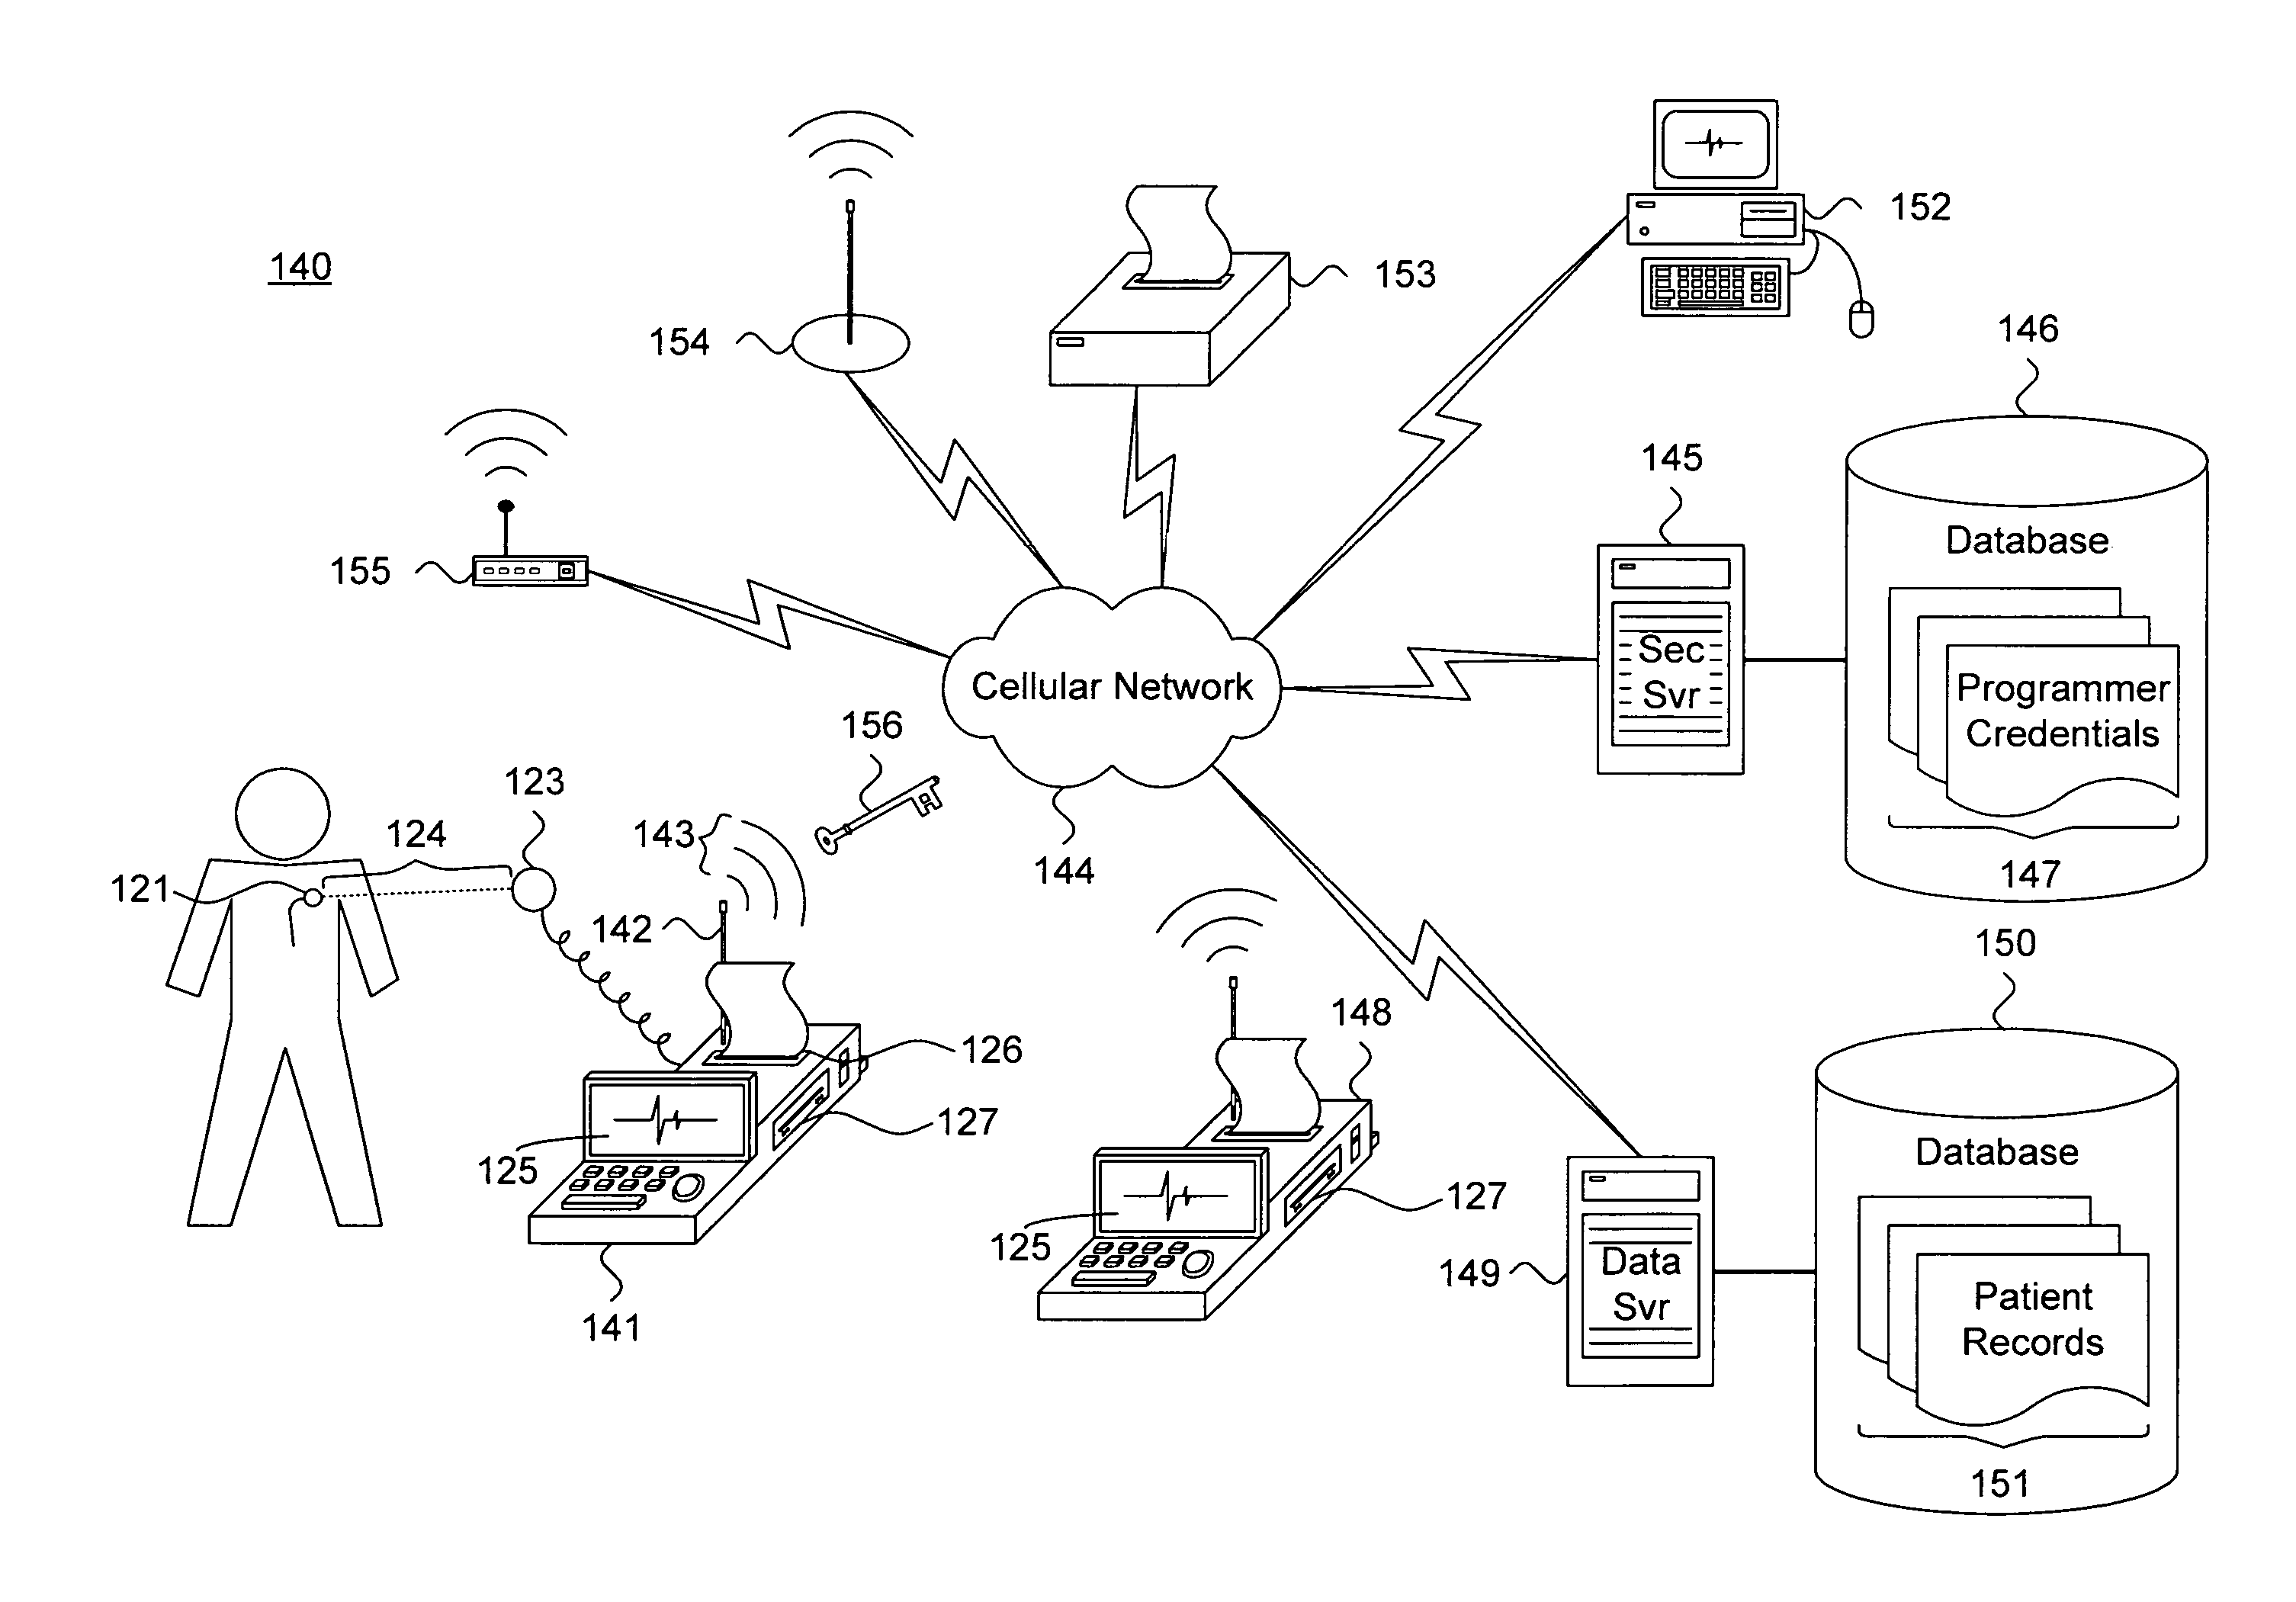 System and method for providing communications between a physically secure programmer and an external device using a cellular network